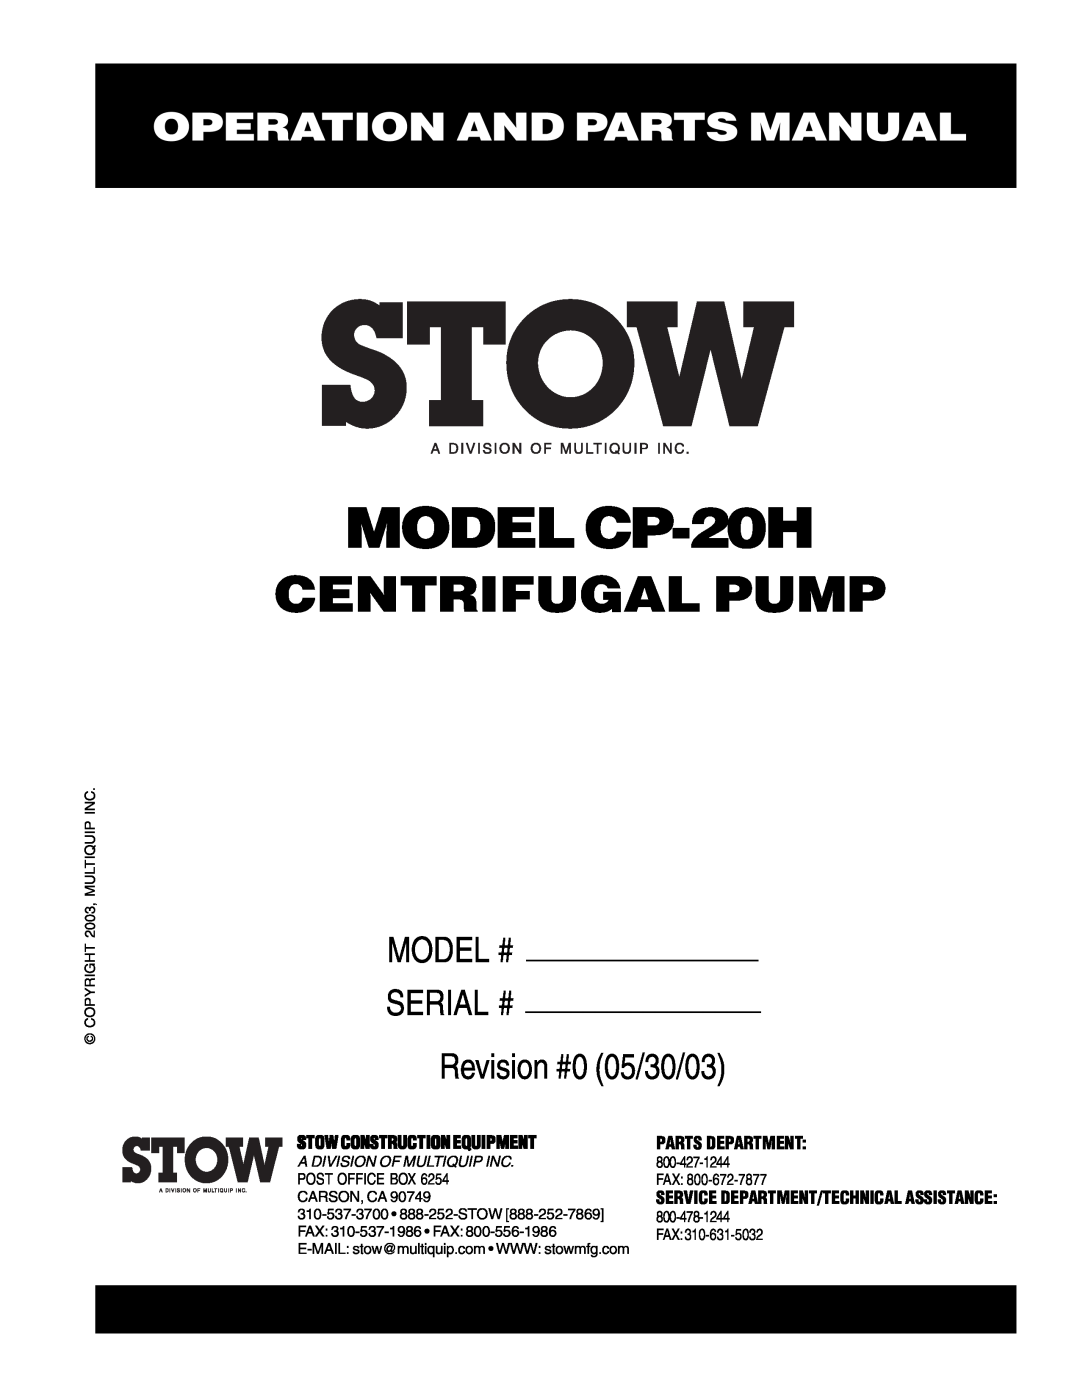 Stow manual Operation And Parts Manual, MODEL CP-20H, Centrifugal Pump, MODEL # SERIAL # Revision #0 05/30/03, Fax 